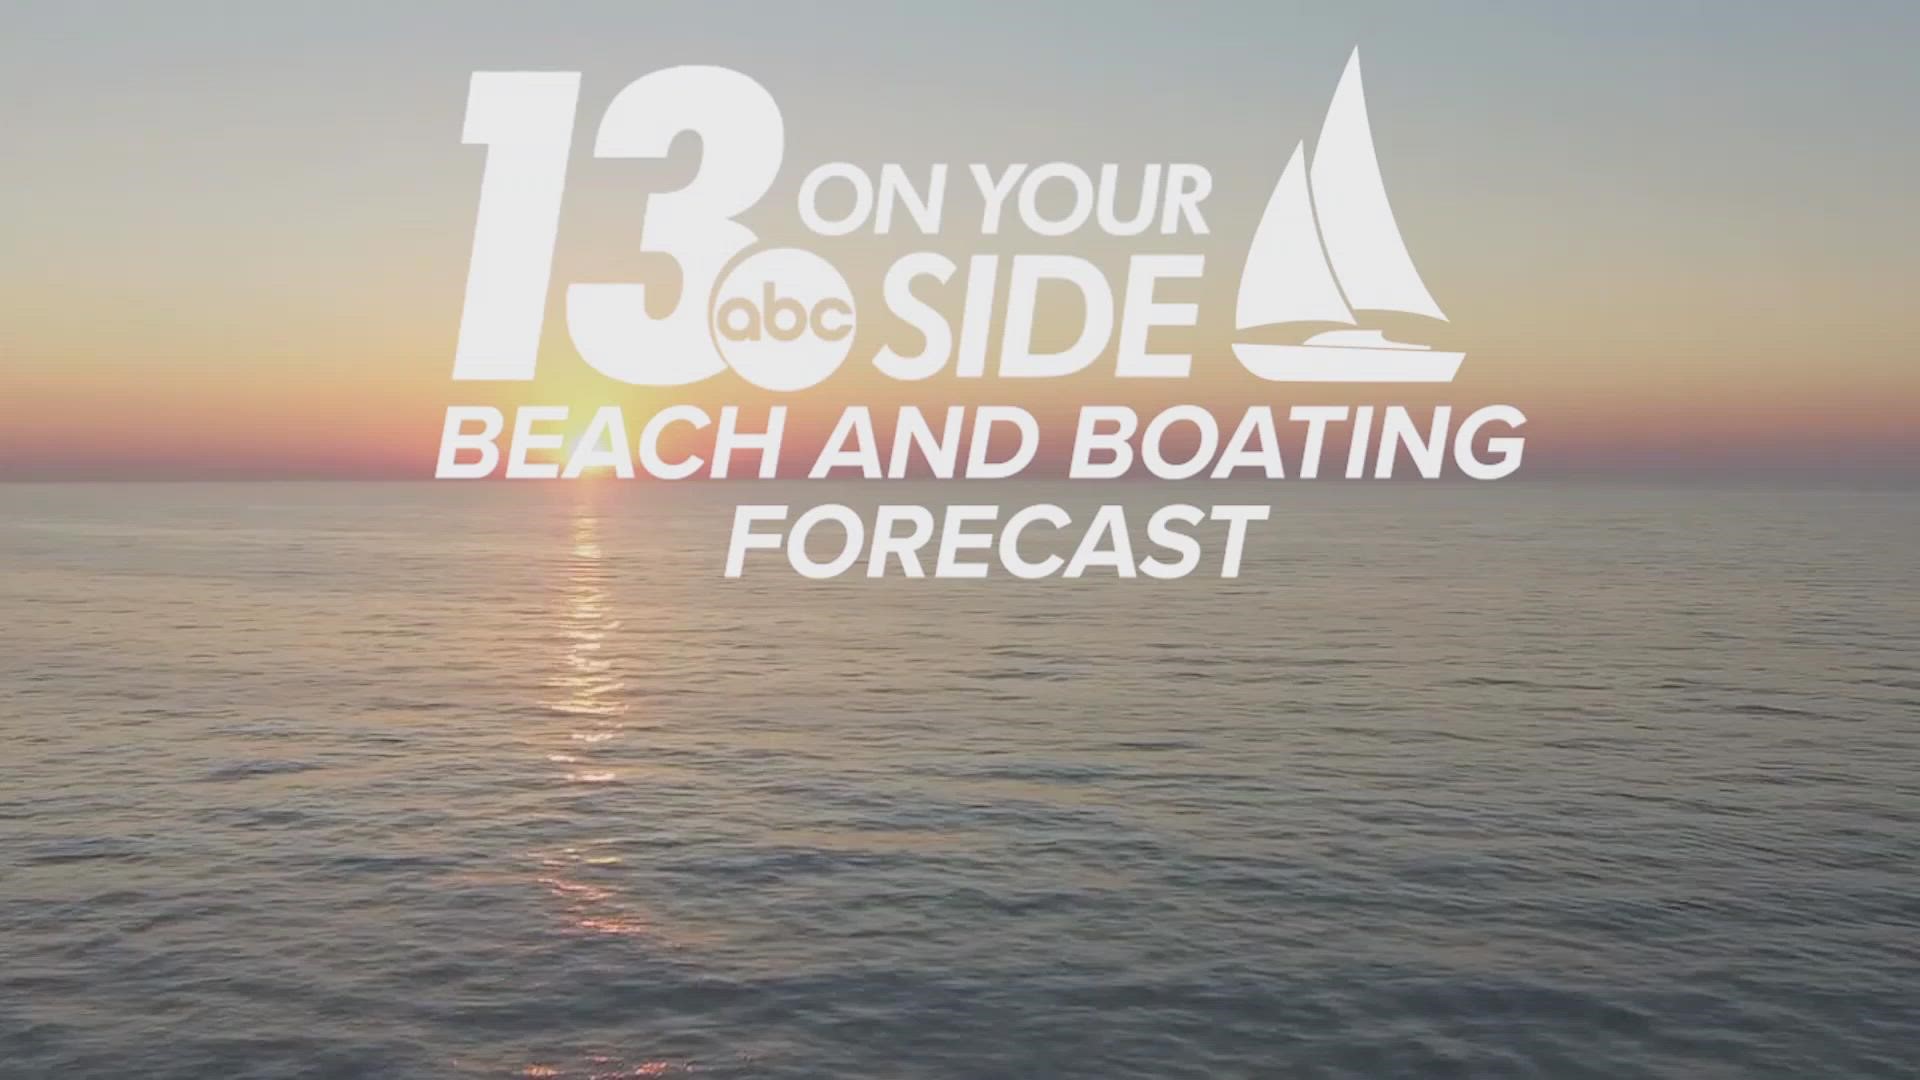 Here's your West Michigan Beach & Boating Forecast for 10/5/2022.